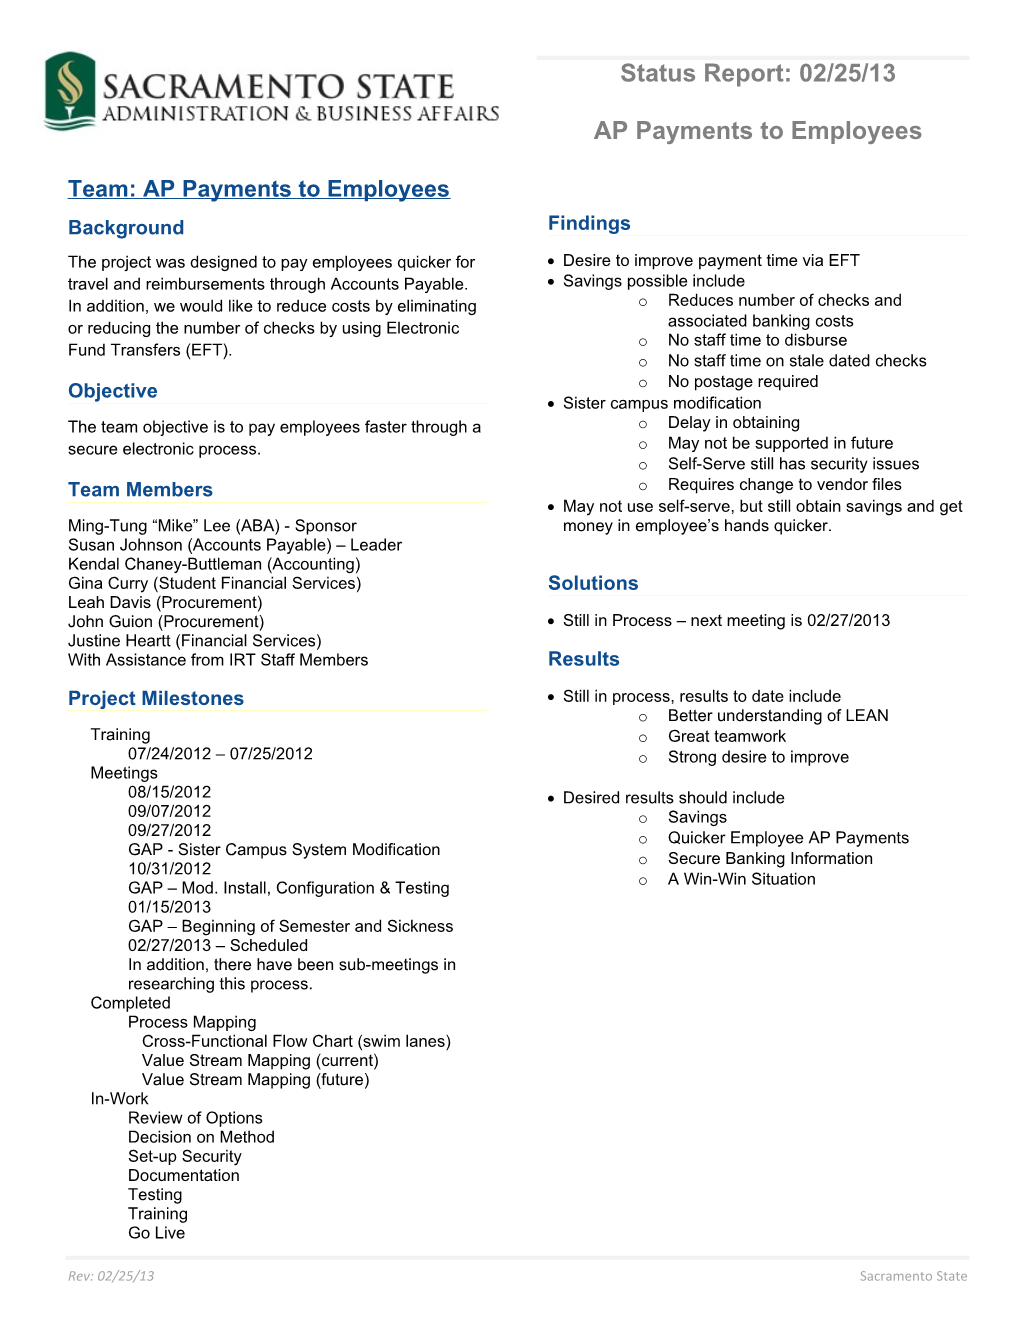 Team: AP Payments to Employees